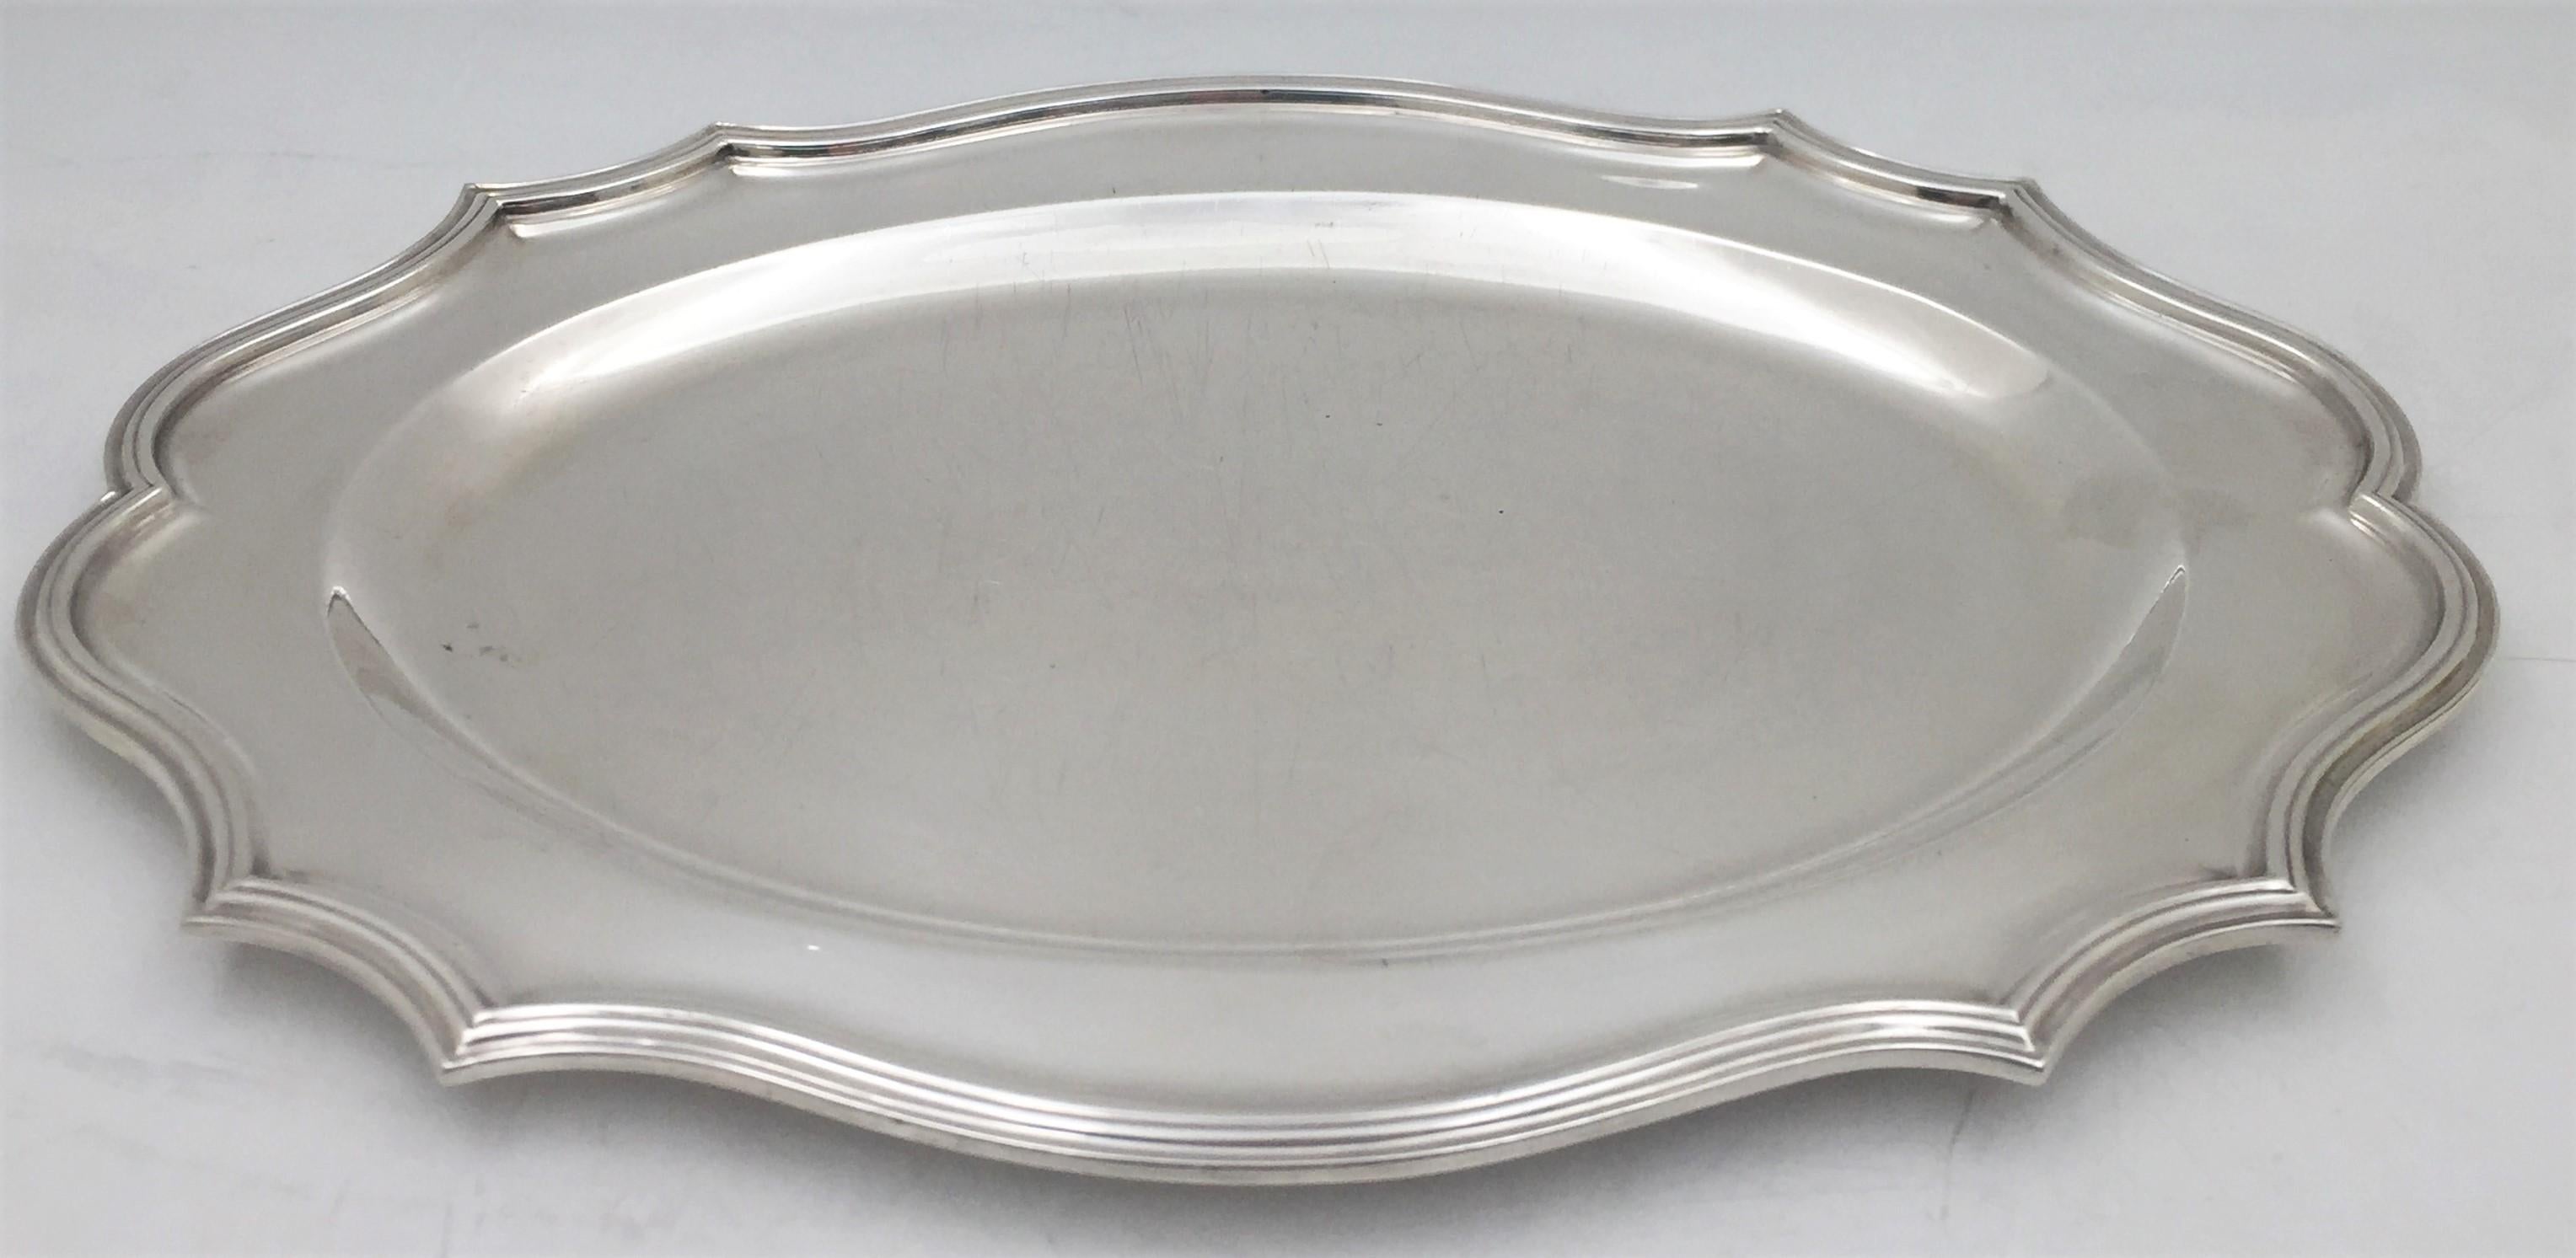 Peter Guille English sterling silver tray or platter from 1939 in Mid-Century Modern style with a beautiful, geometric, and curvilinear design. It measures 14 7/8'' in length by 10 1/4'' in width by 3/4'' in height, weighs 33.4 troy ounces, and